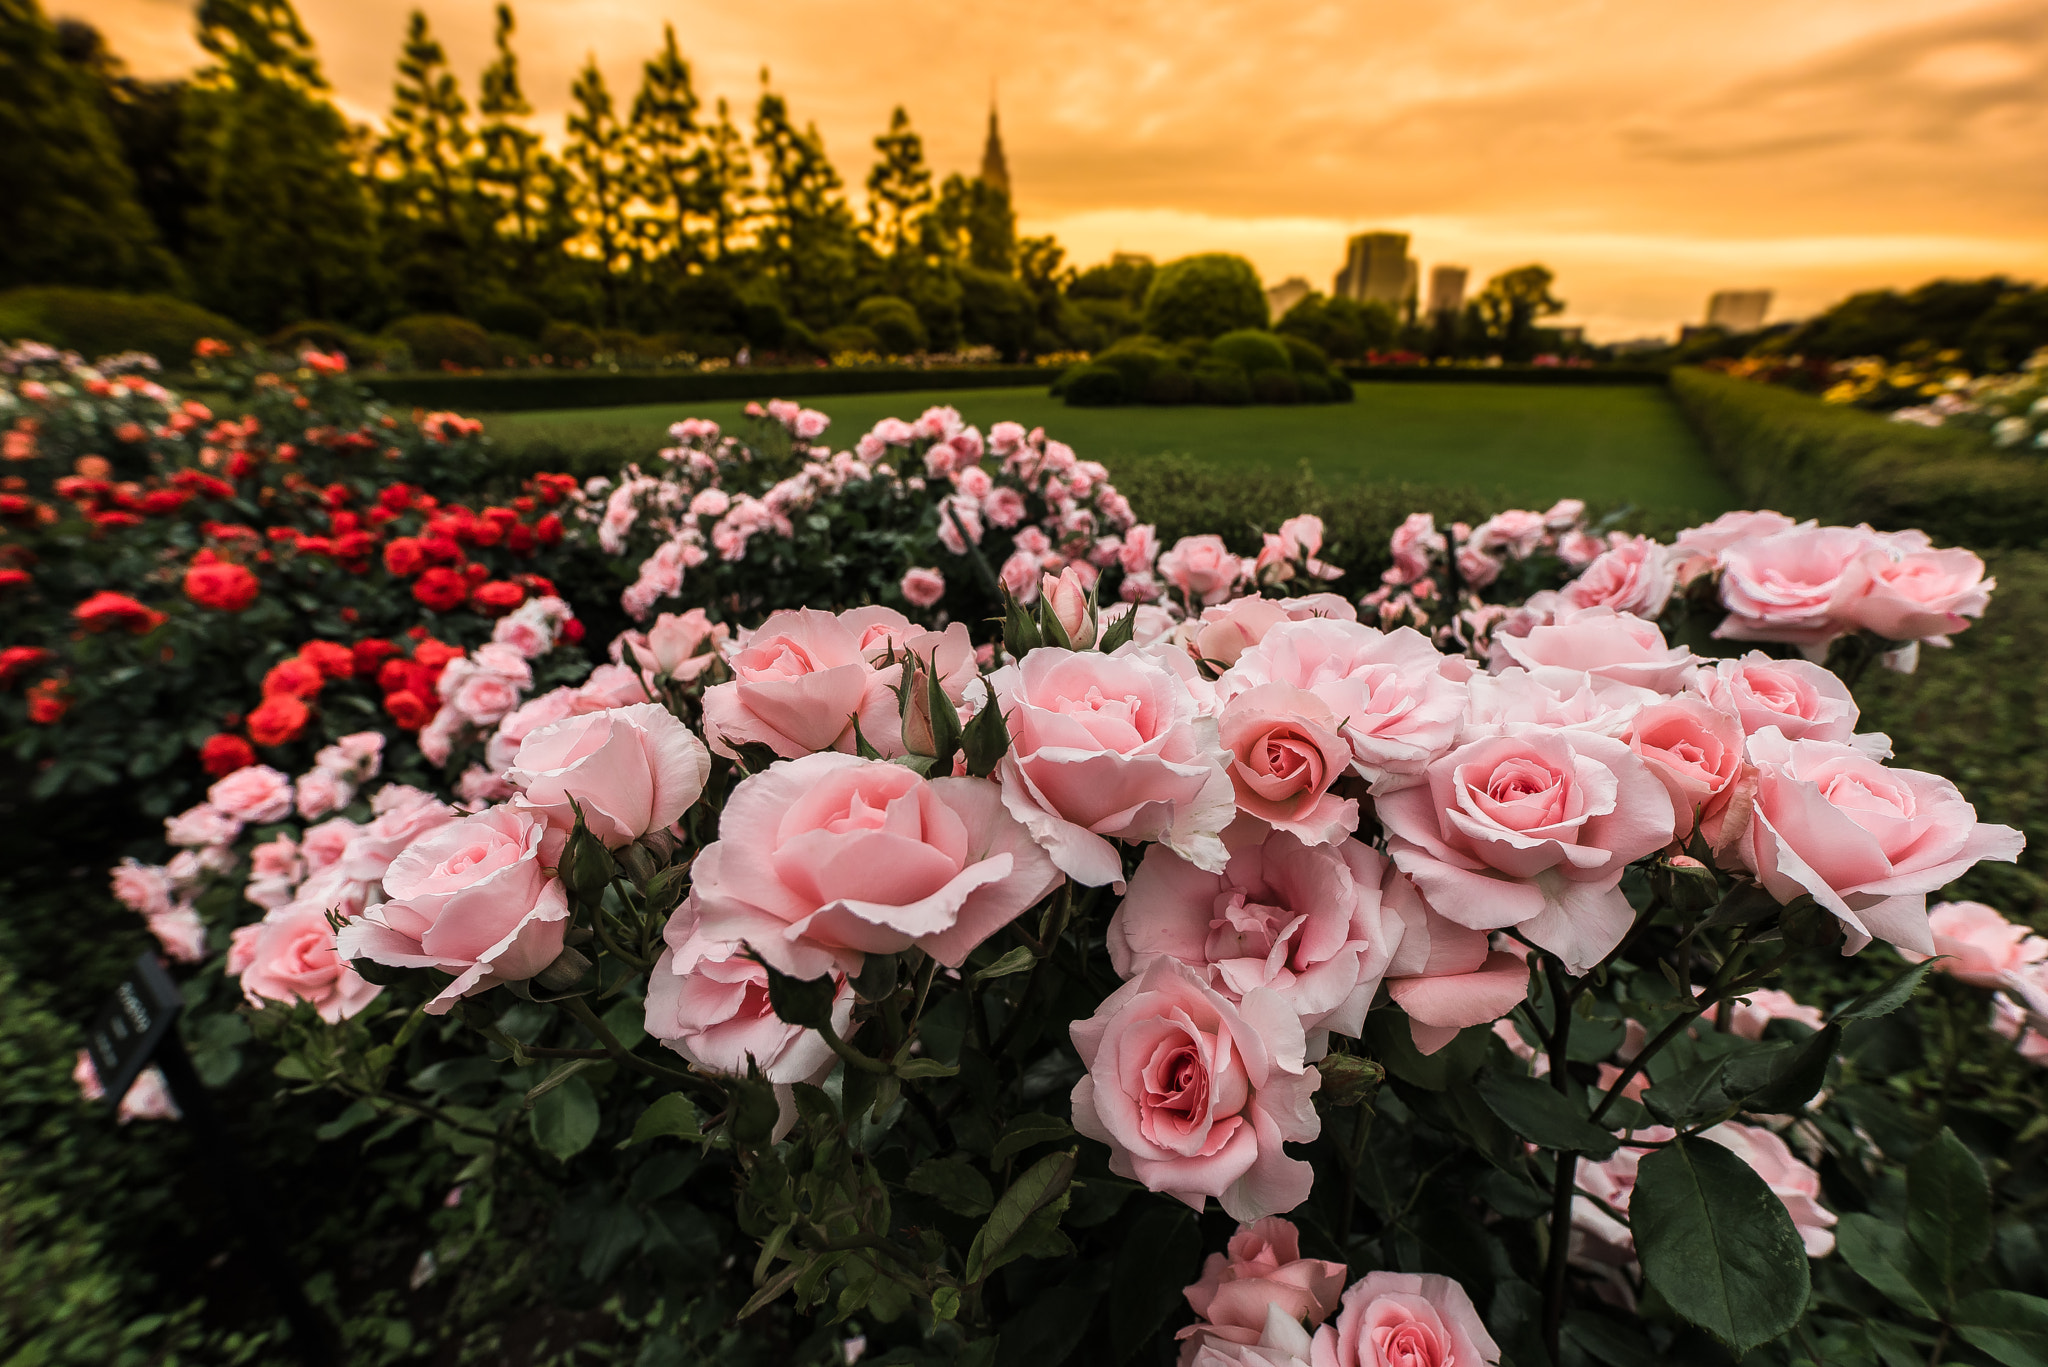 ZEISS Distagon T* 15mm F2.8 sample photo. Sunset roses photography